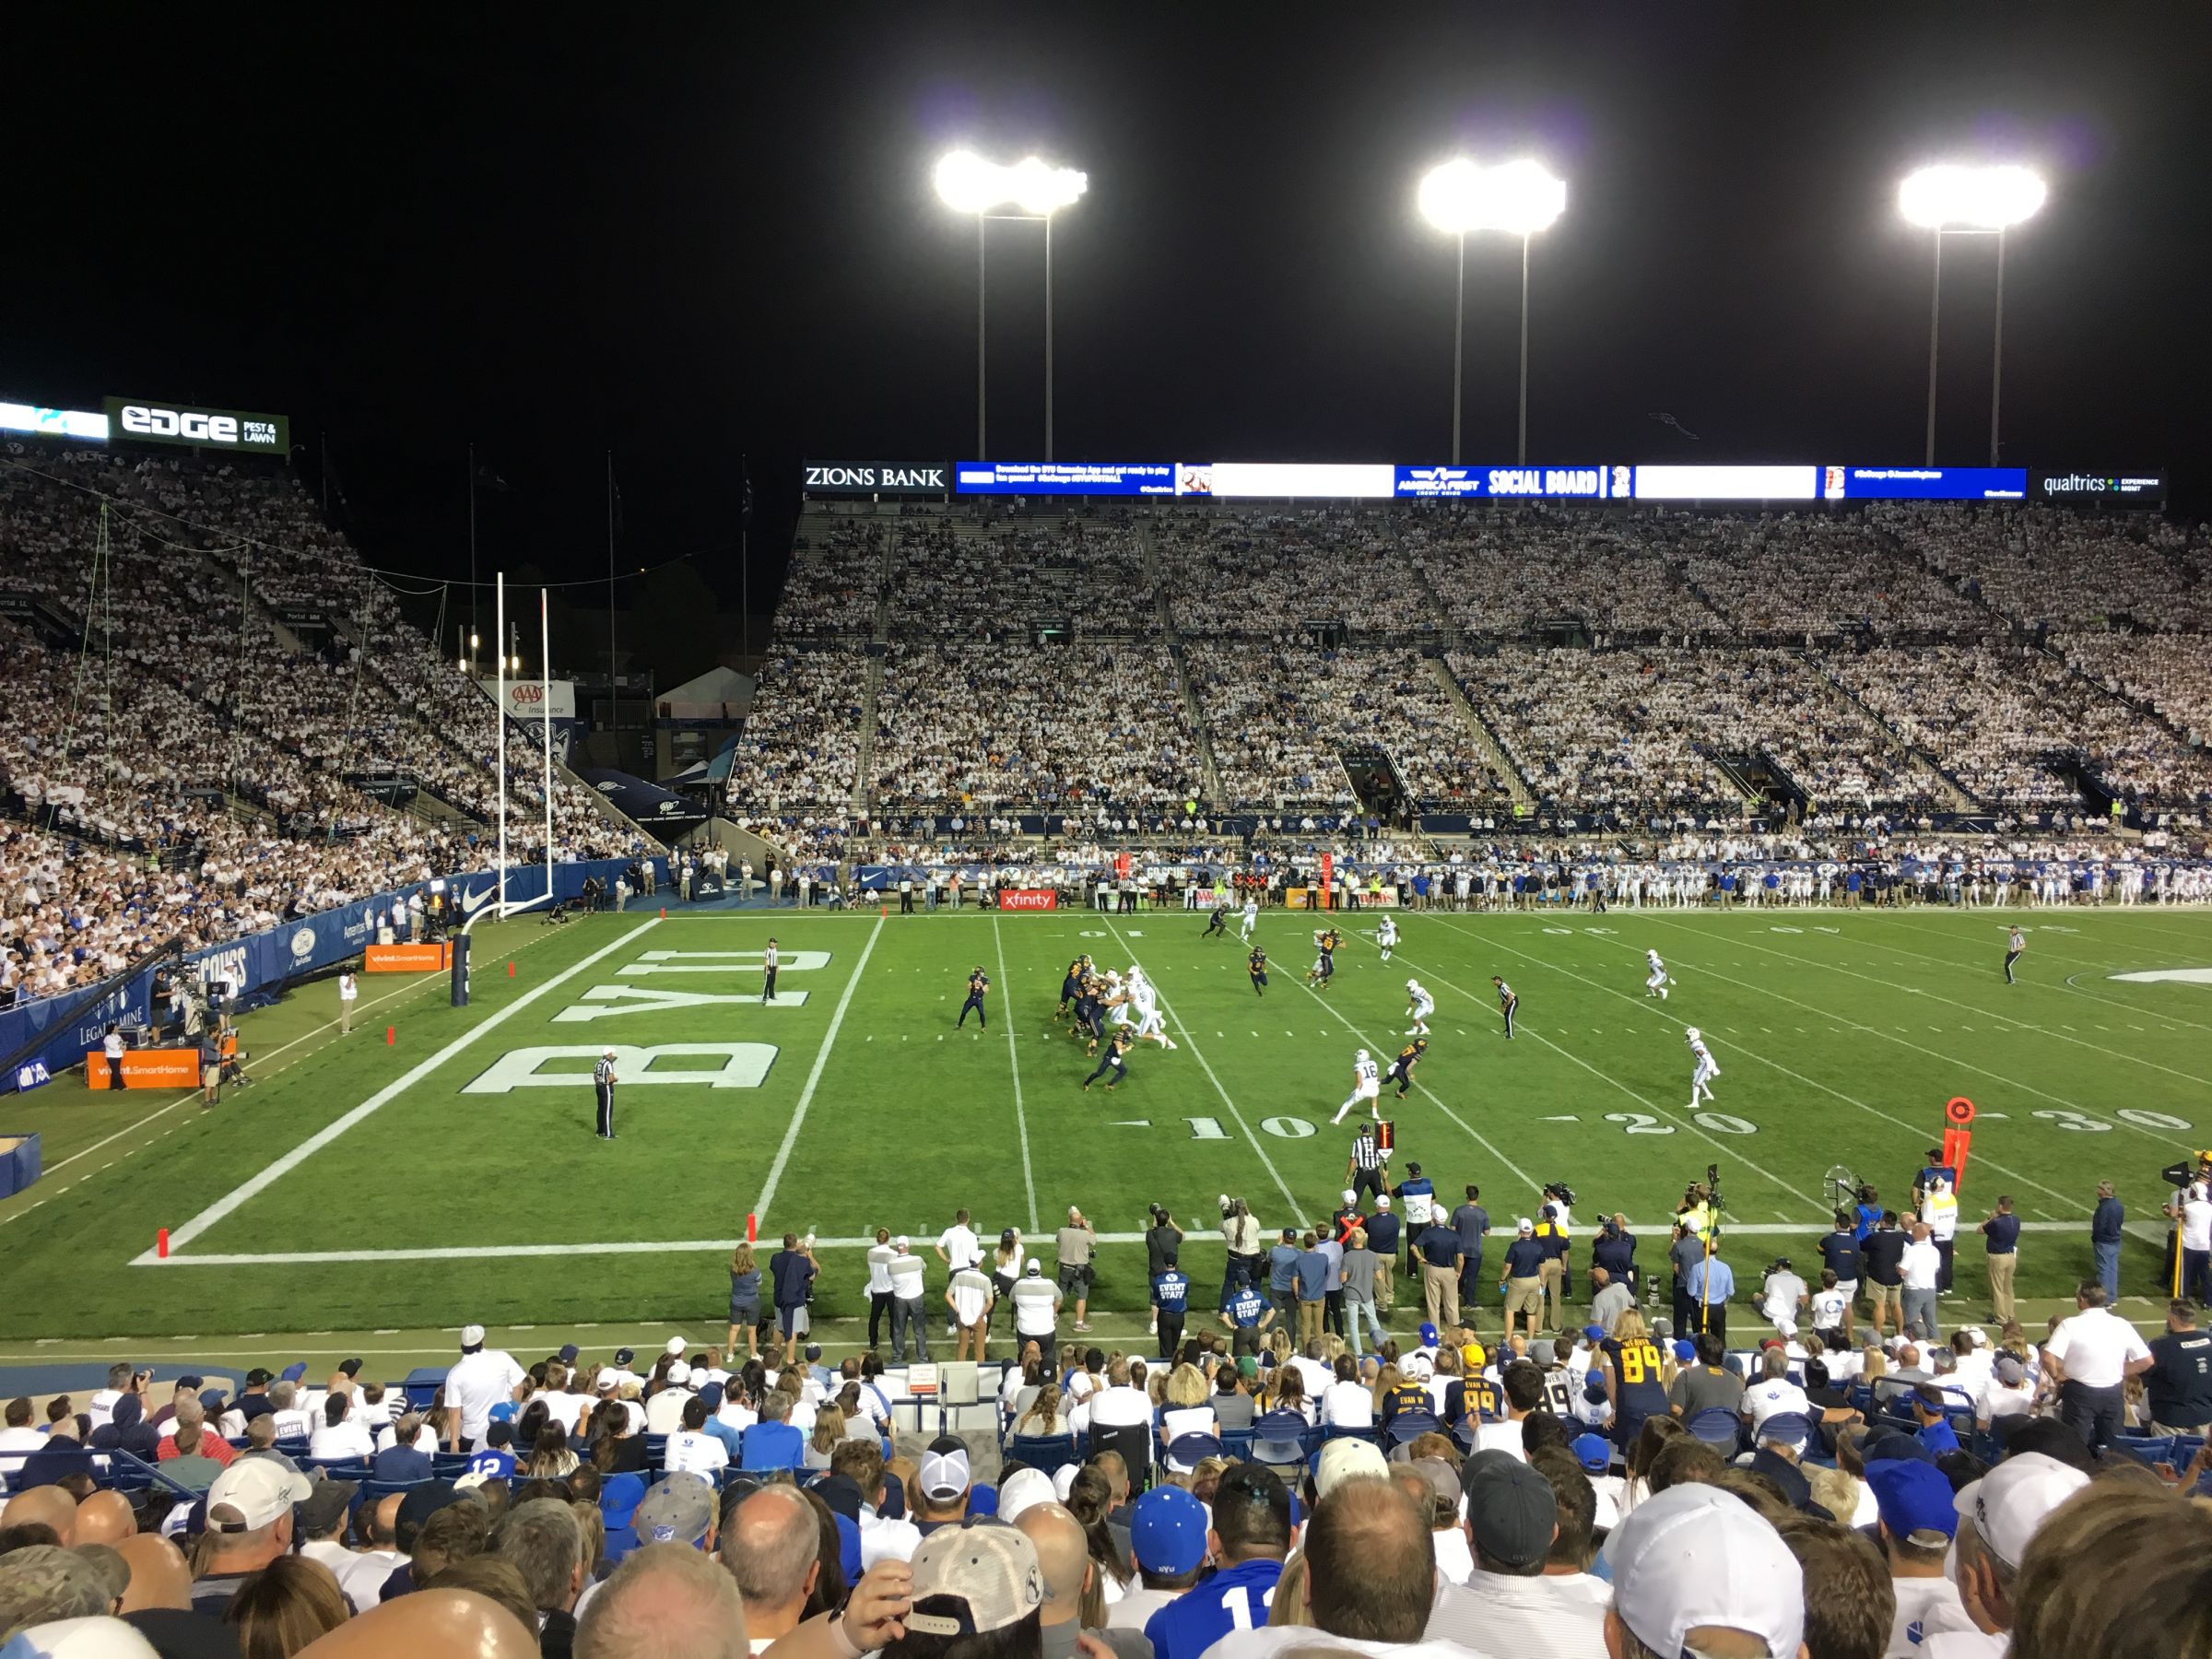 section 8, row 24 seat view  - lavell edwards stadium